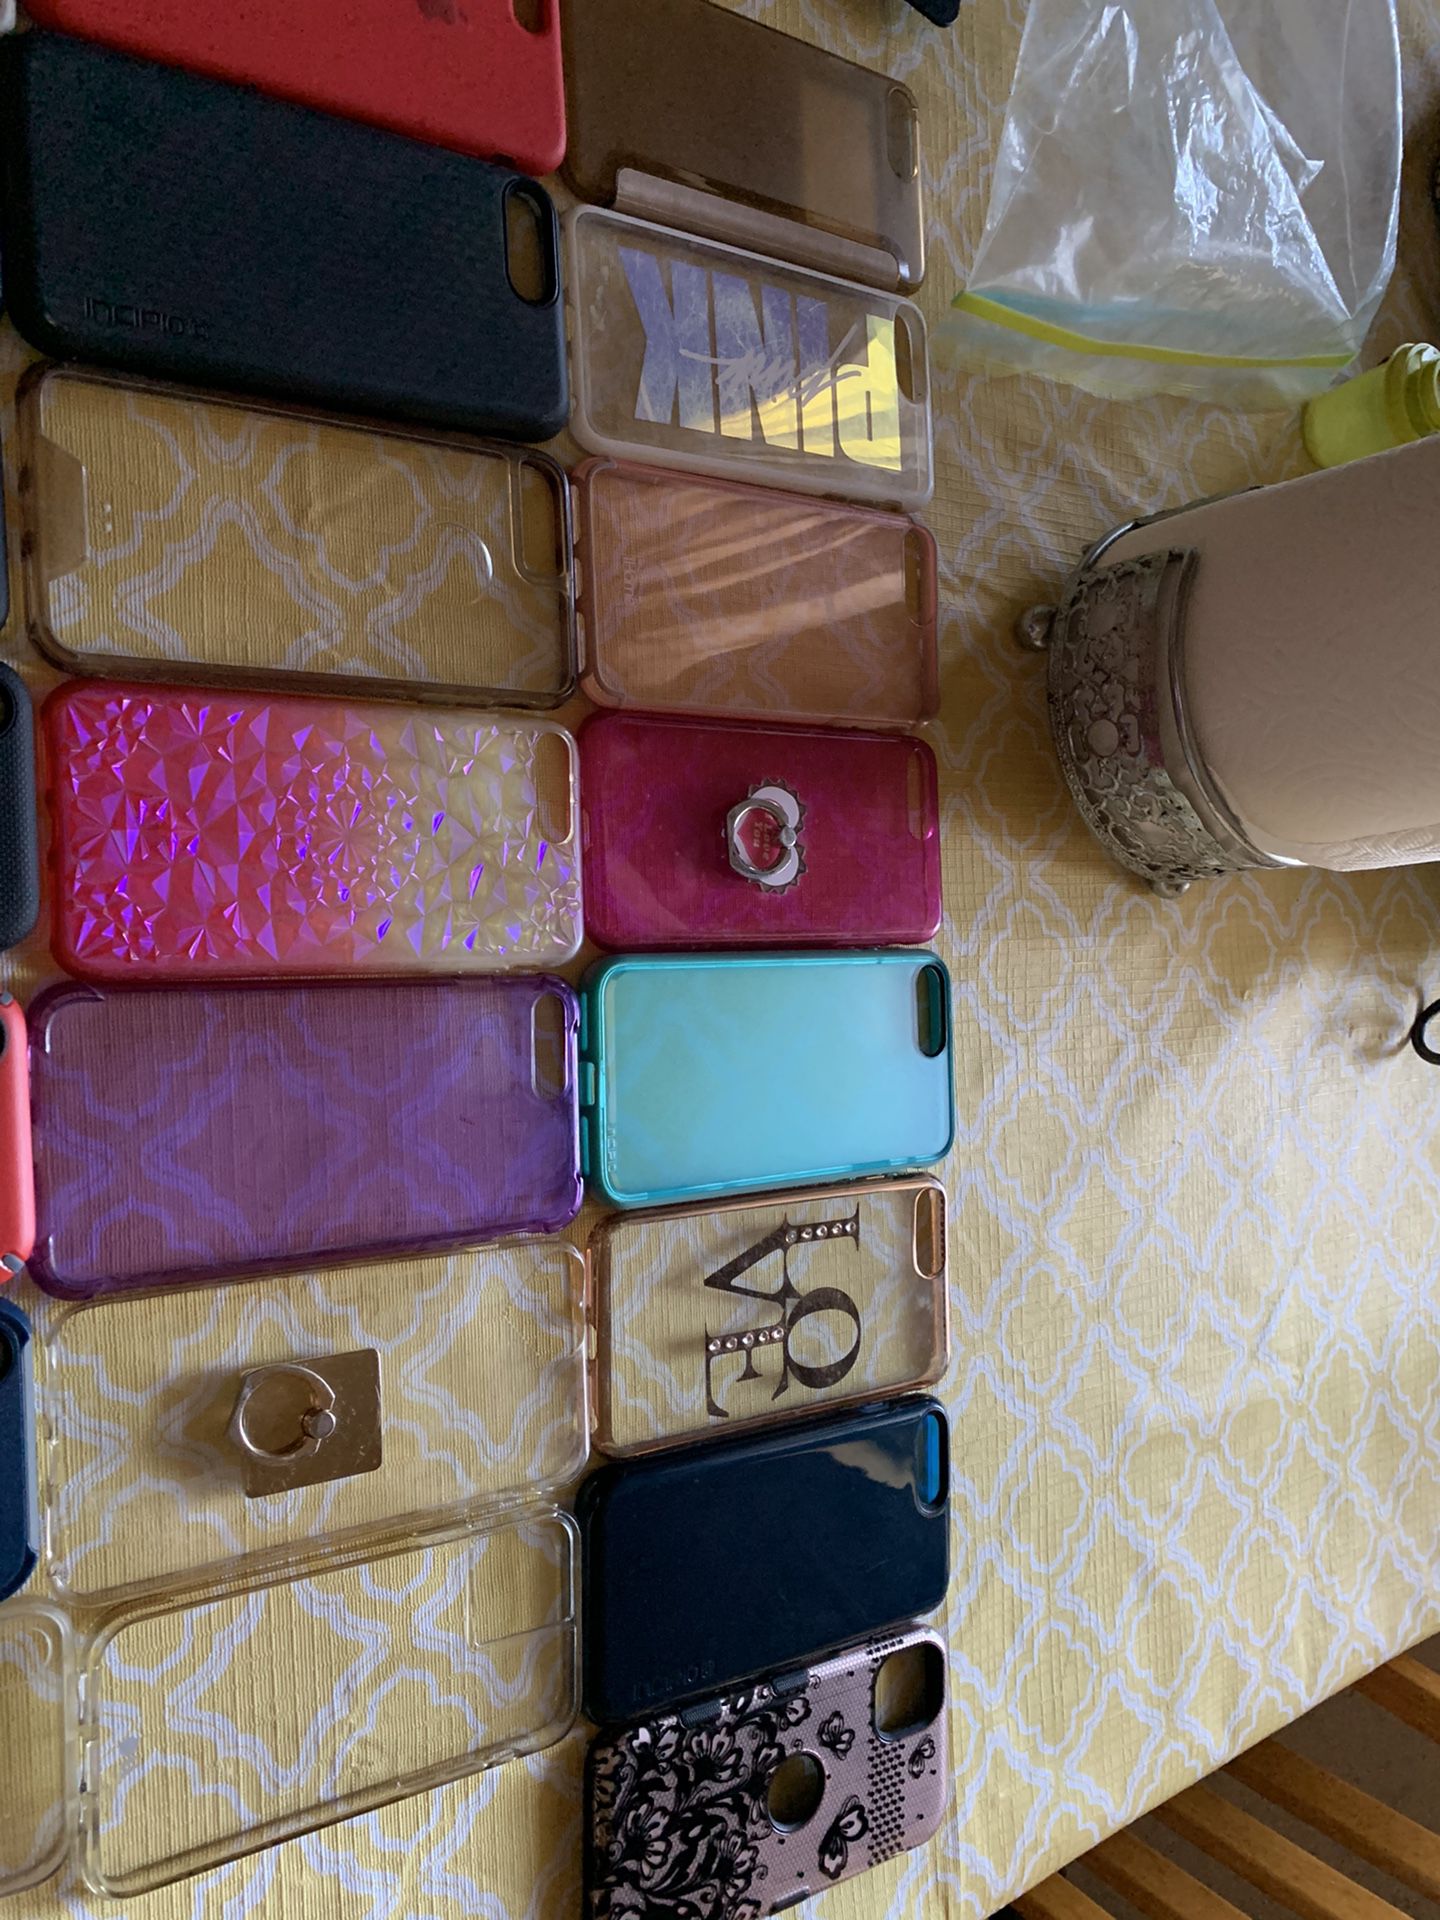 Iphone 8 plus, iphone x, iphone 11, and iphone 11 pro cases